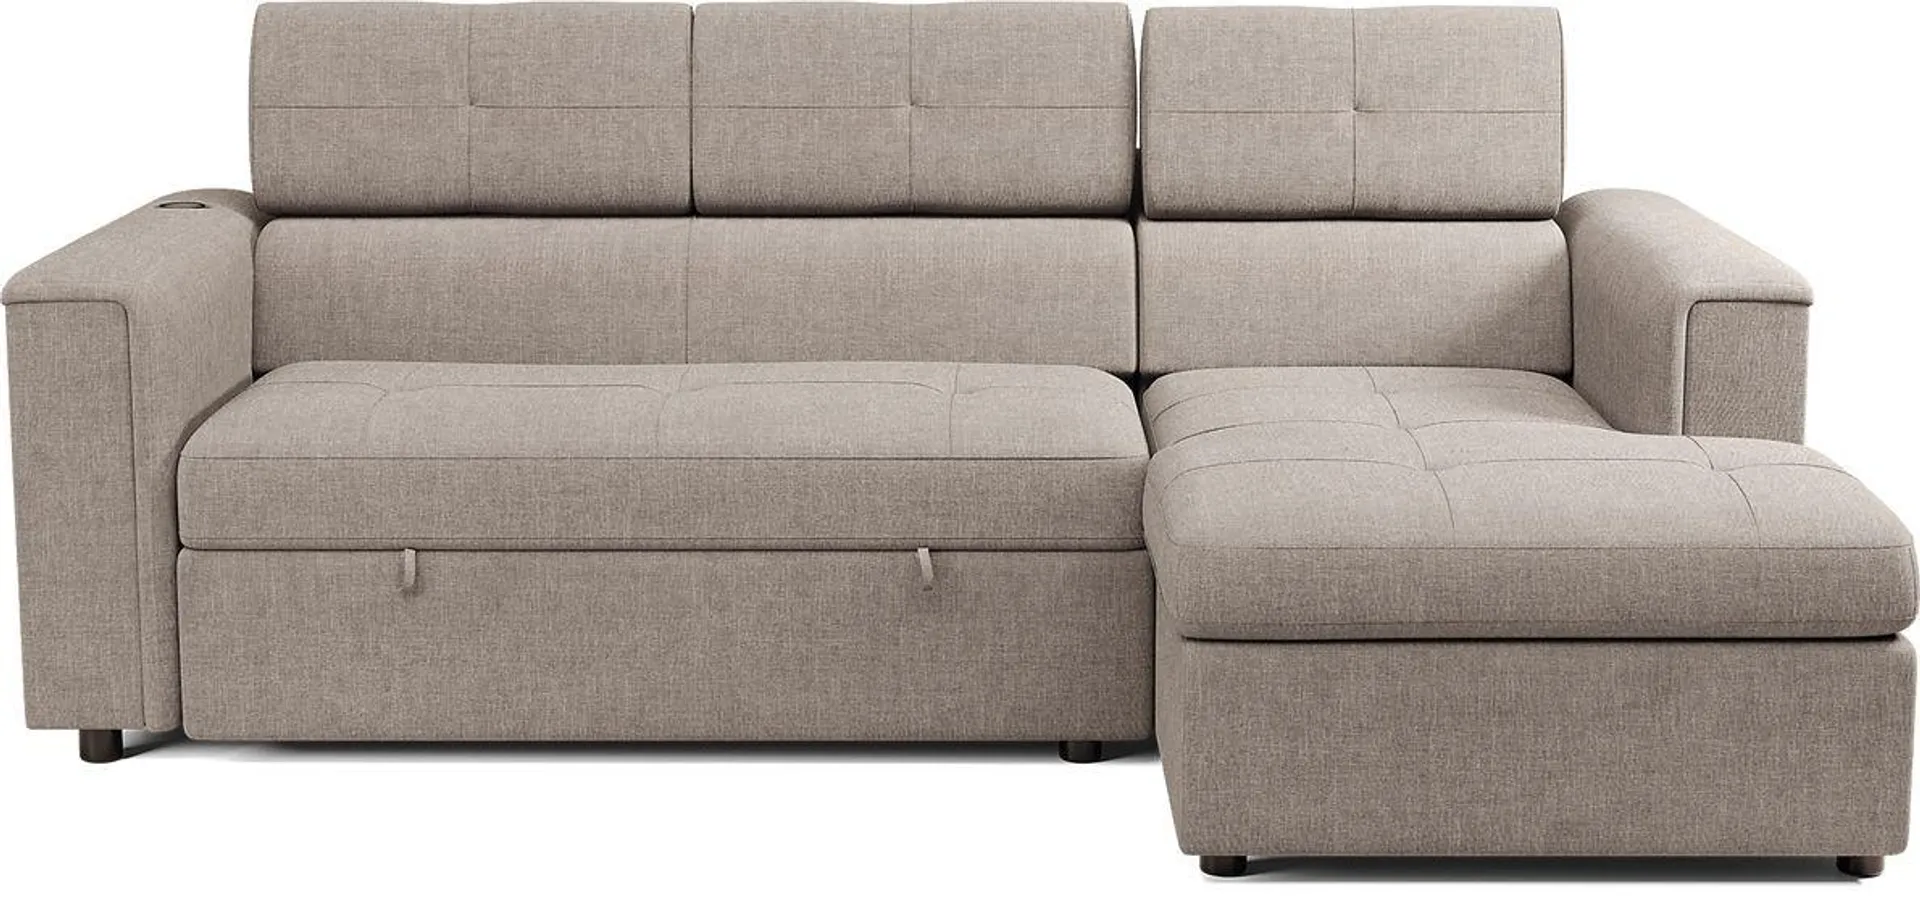 Coleford 2 Pc Sleeper Sectional